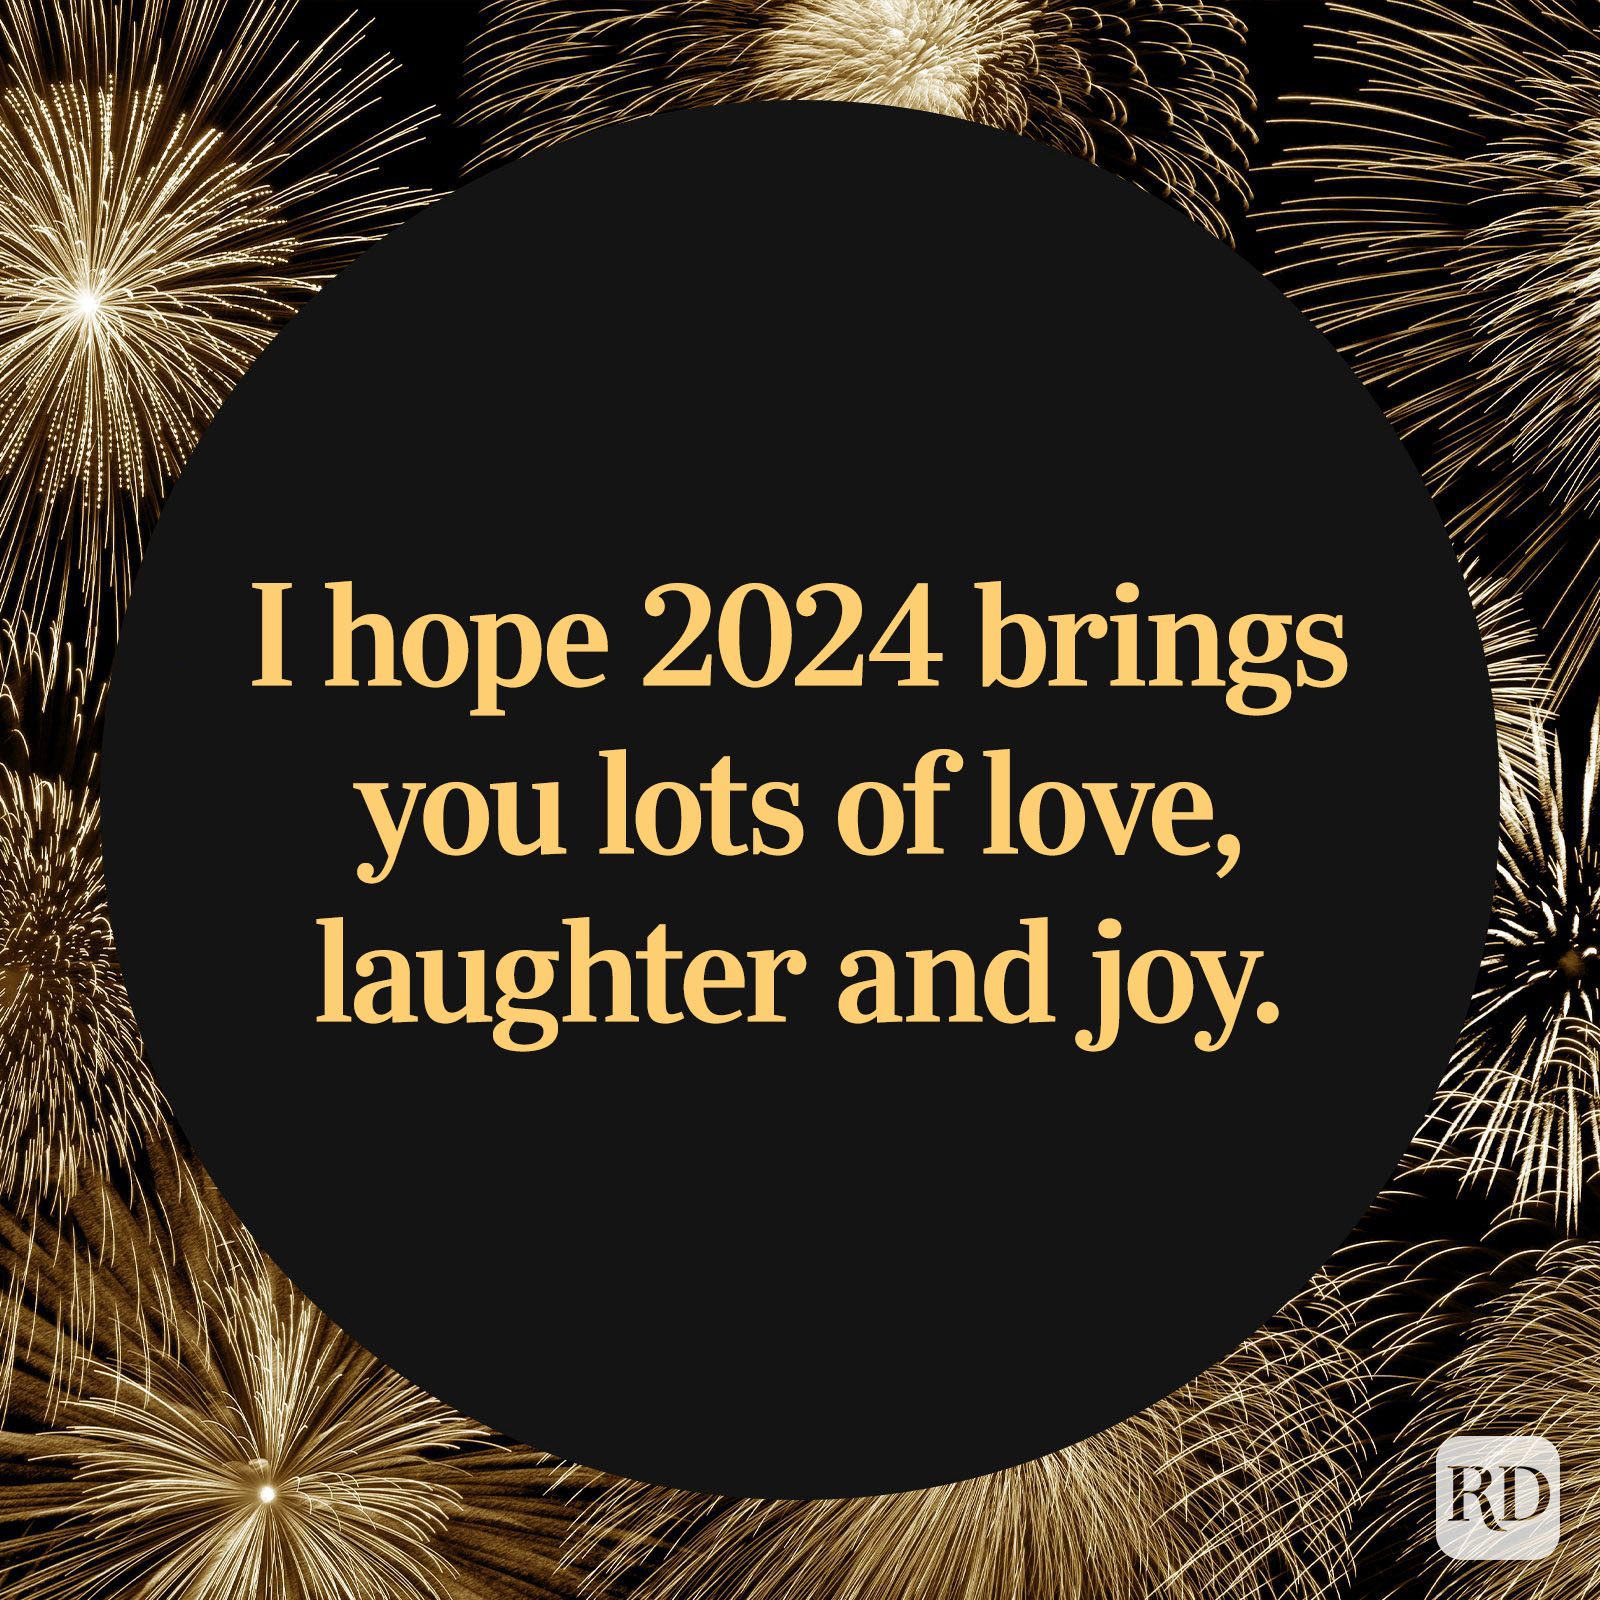 We hope the new year brings you health, happiness and endless joy